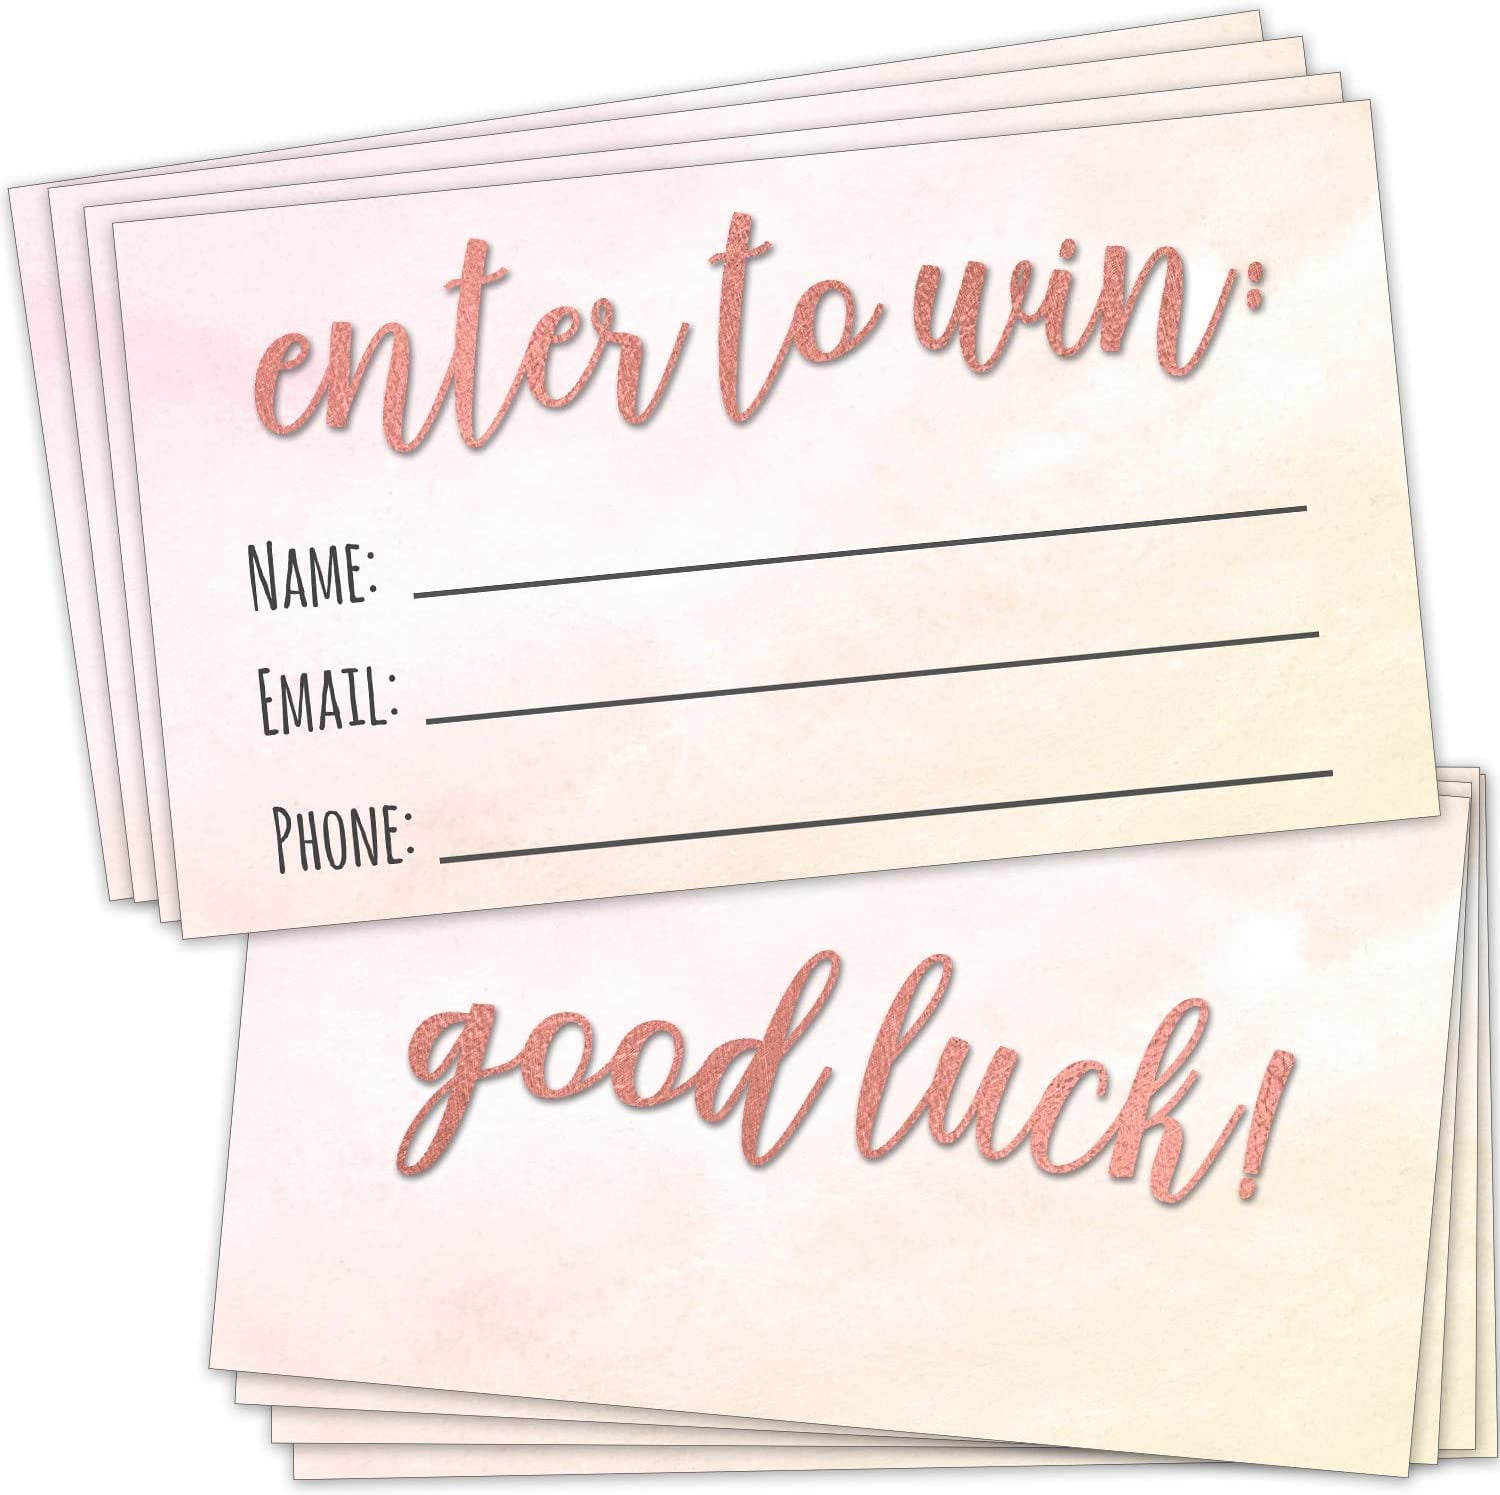 Enter to Win Cards - (Pack of 100) Rose Gold Foil Letterpress 3.5 x 2  Raffle Tickets Contest Entry Card Lucky Draw Blank Member ID 